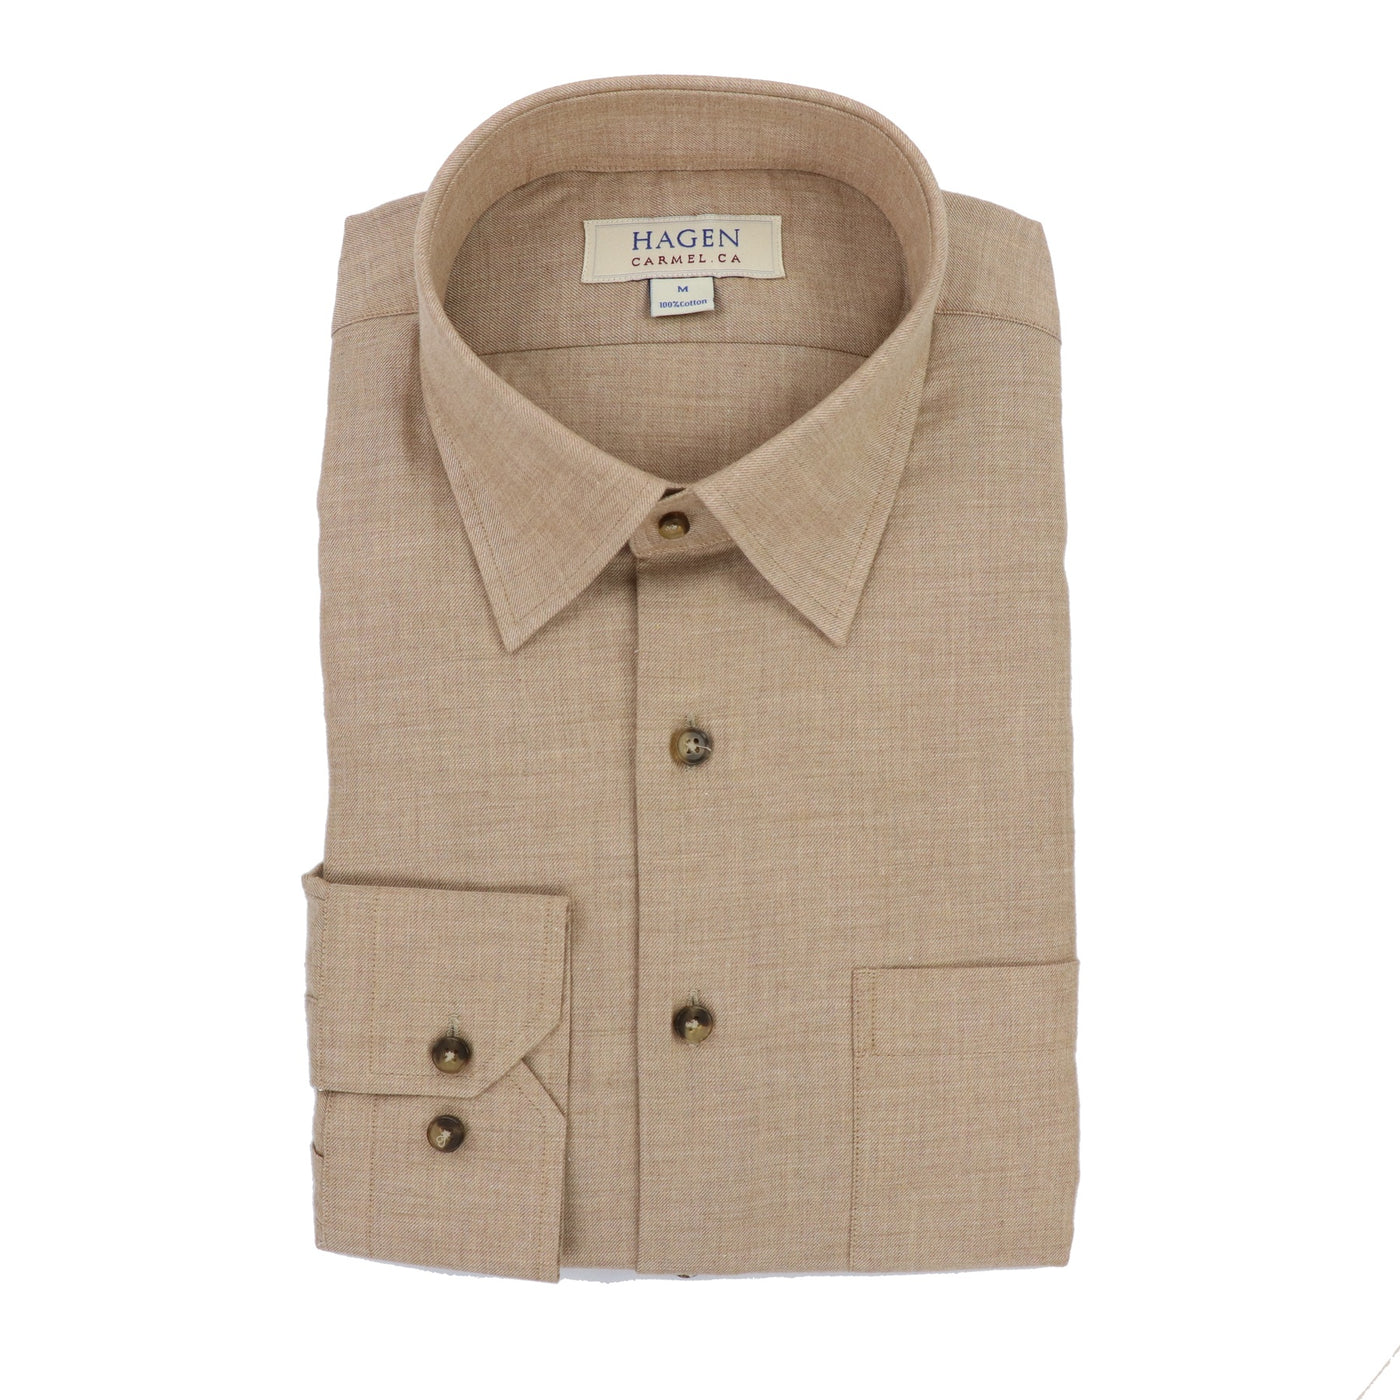 Brushed Twill Sport Shirt in Beige